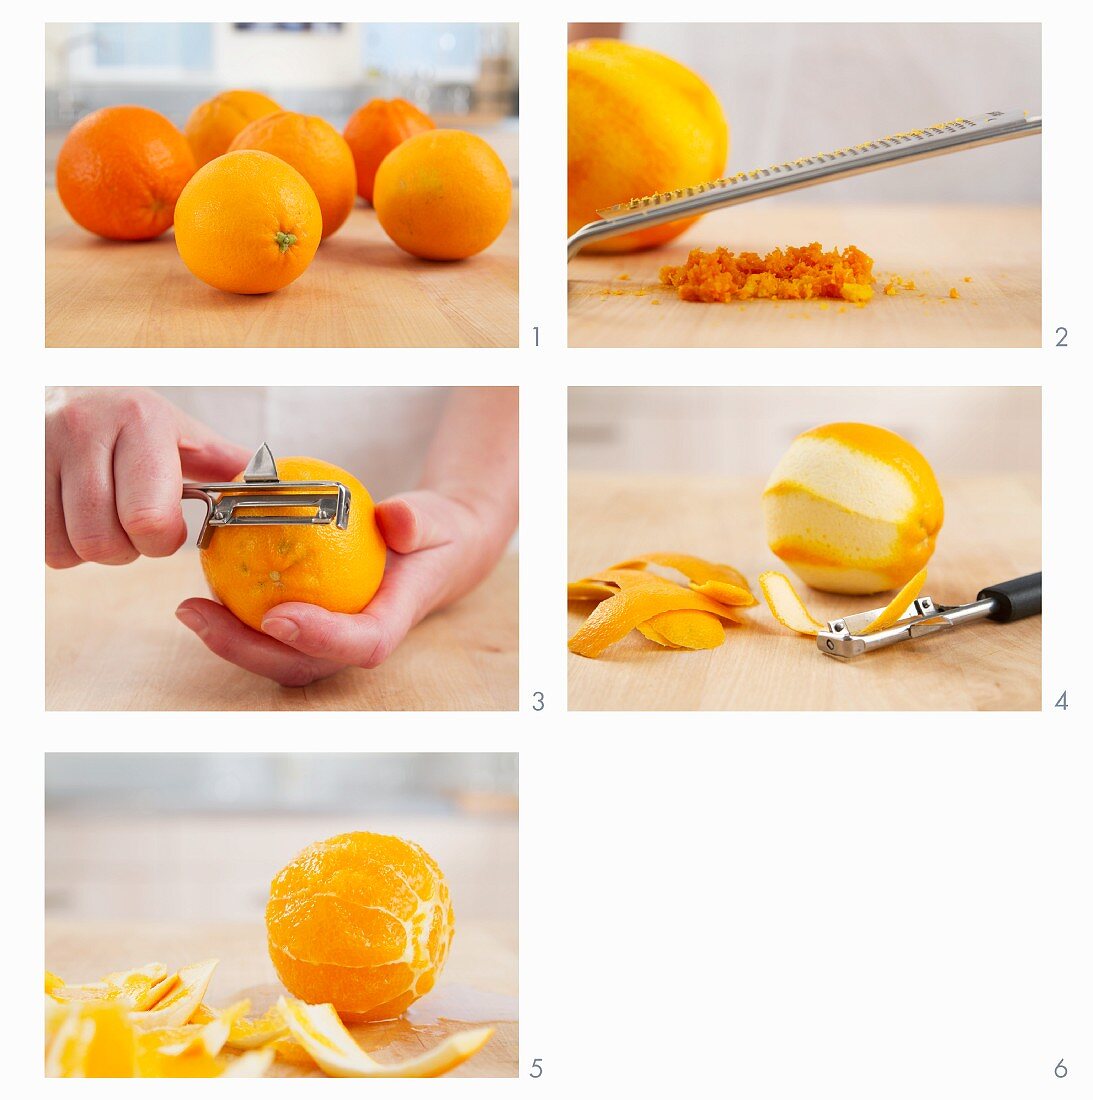 Orange zest being grated and oranges being peeled